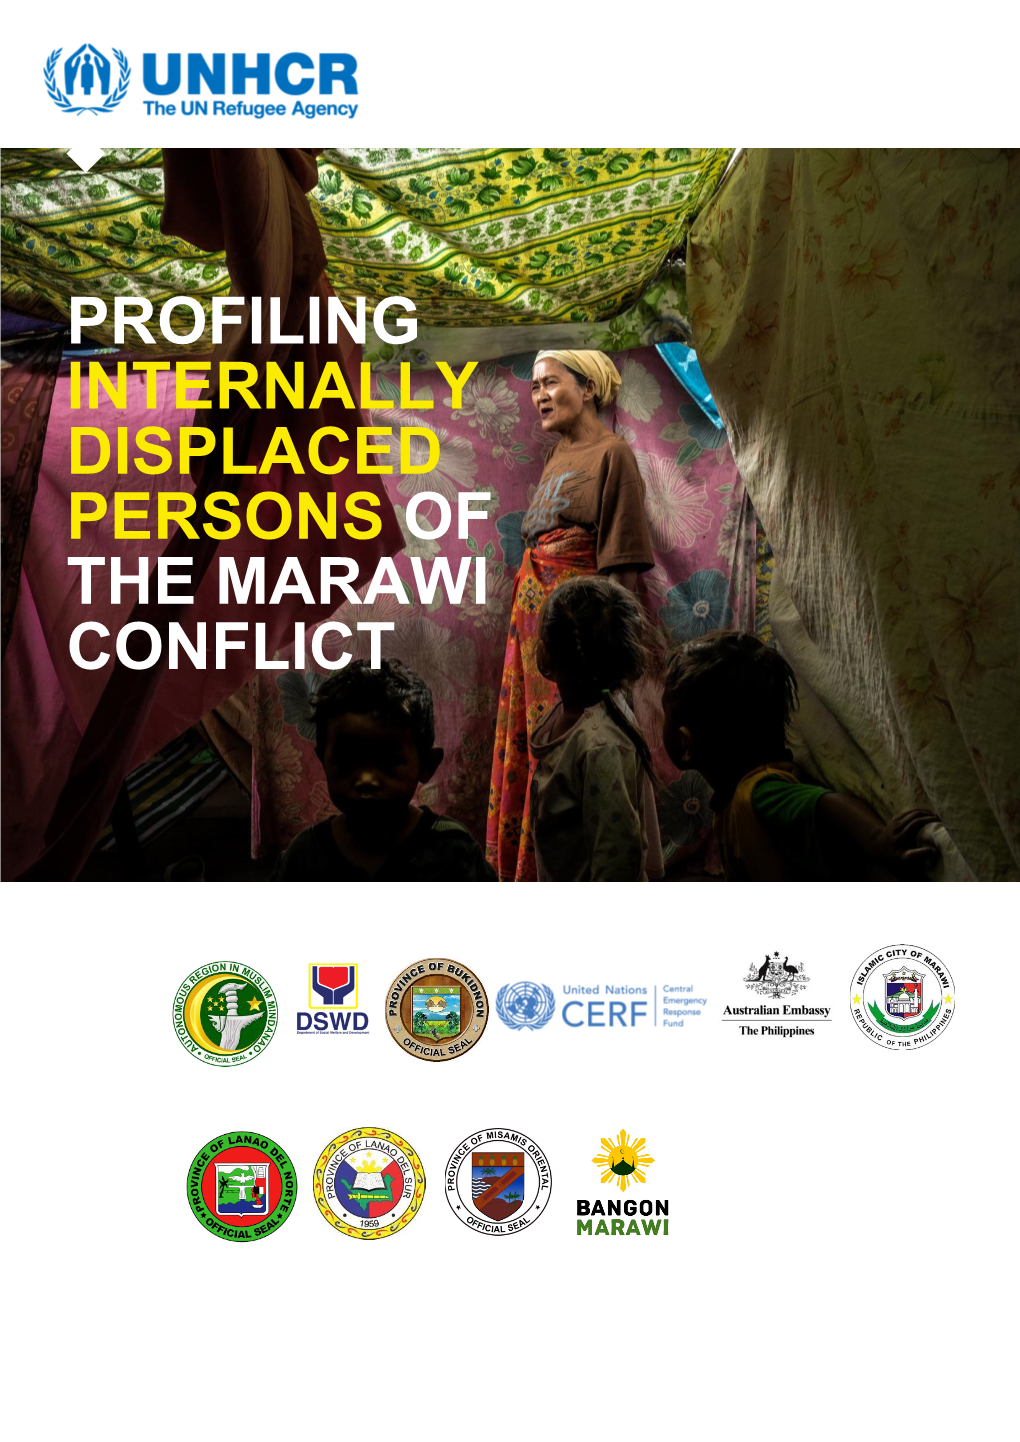 Profiling Internally Displaced Persons of the Marawi Conflict